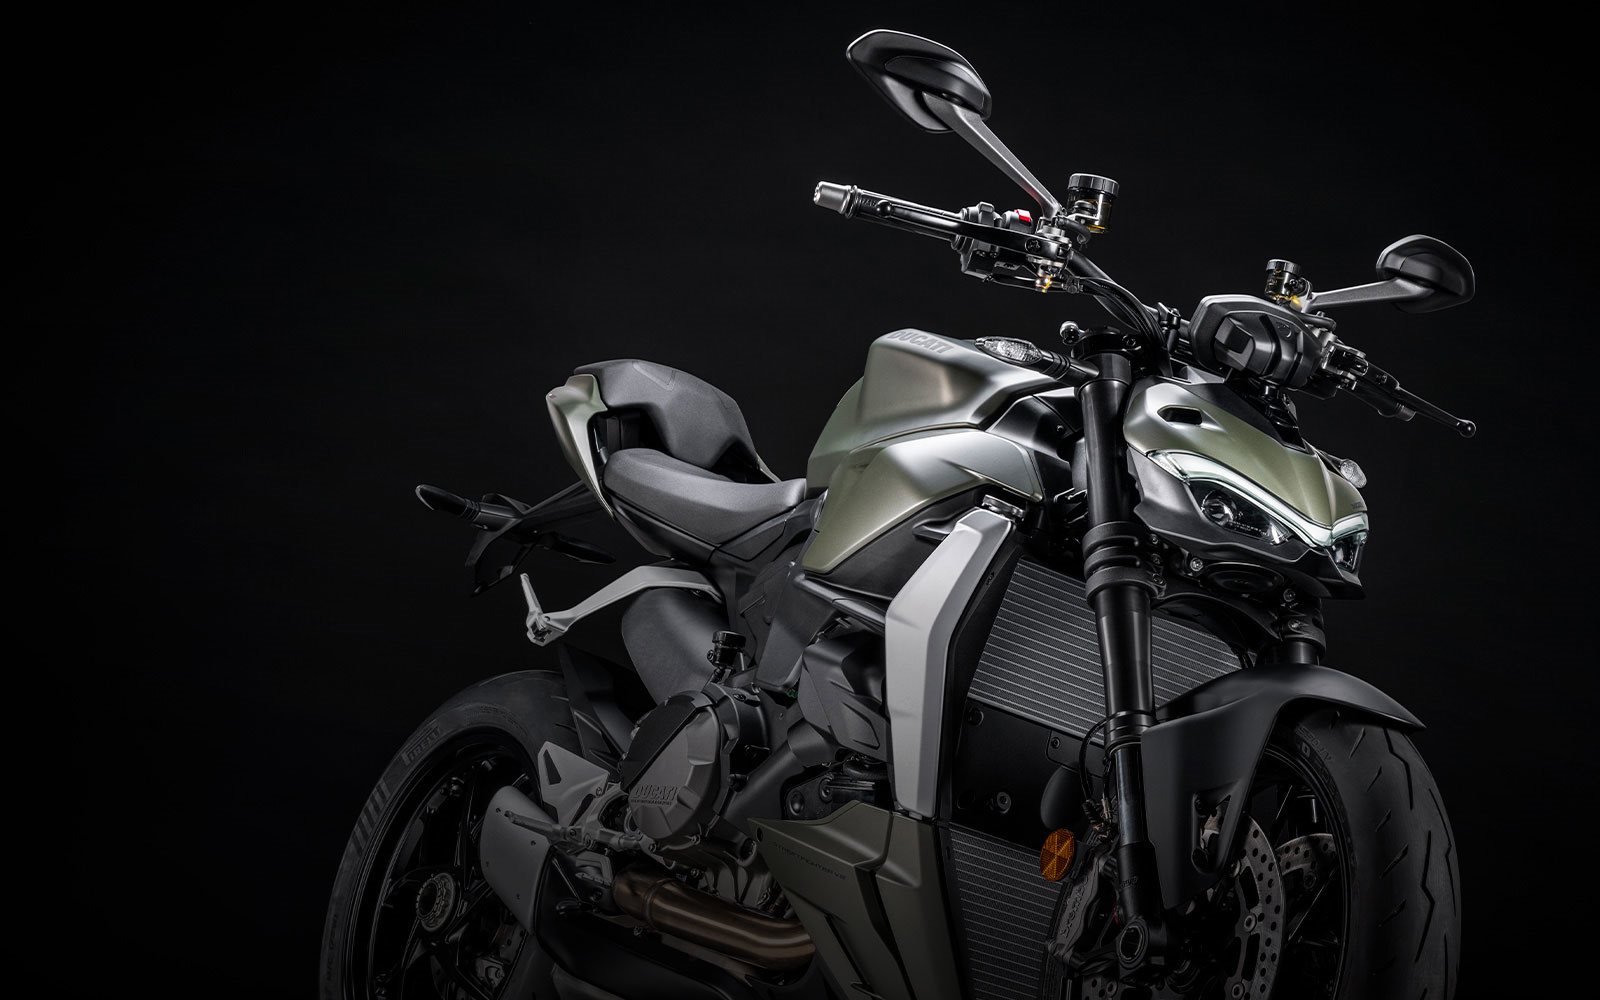 Now available in a new matt metallic green colour that enhances the<br>design of the bike: Storm Green